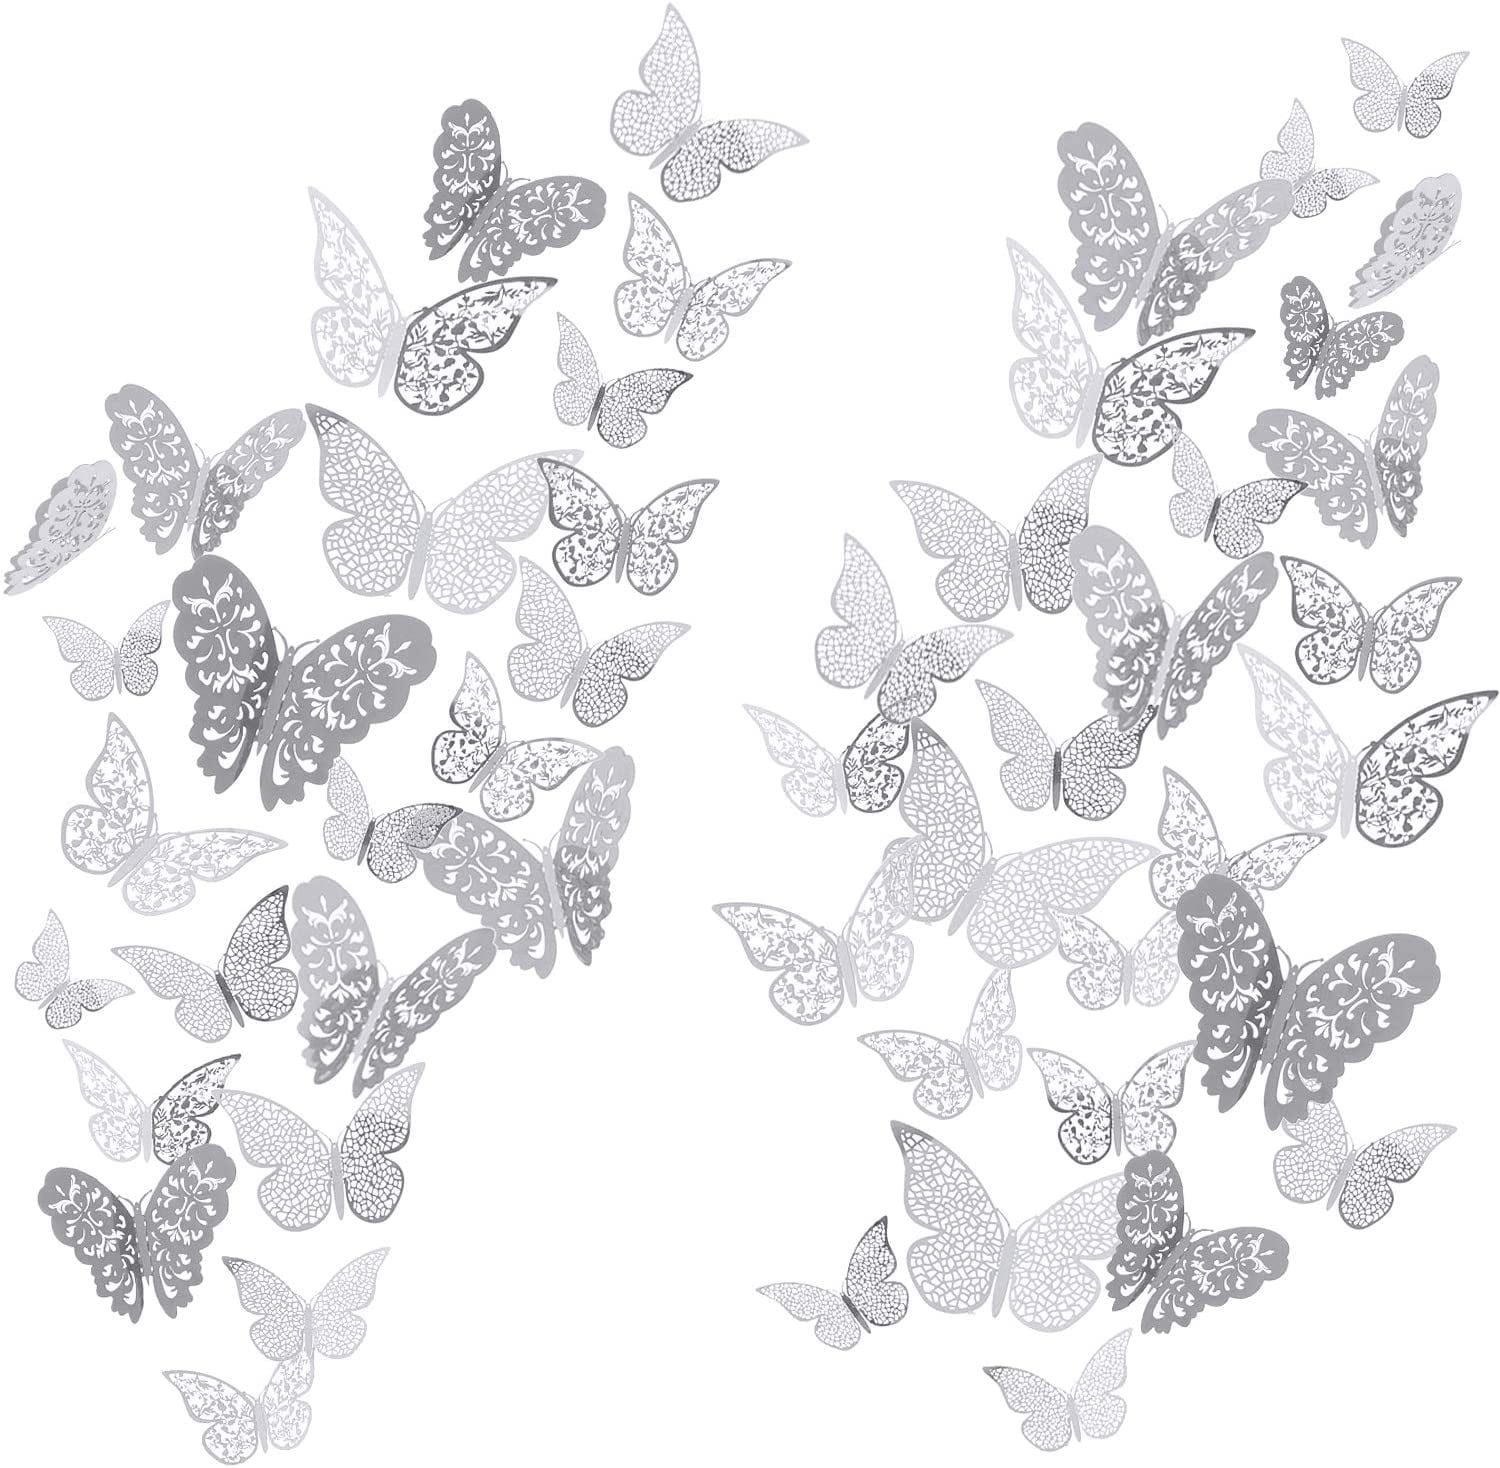 Silver Bememo 72 Pieces 3D Butterfly Wall Decals Sticker Wall Decal Decor Art Decorations Sticker Set 3 Sizes for Room Home Nursery Classroom Offices Kids Girl Boy Bedroom Bathroom Living Room Decor